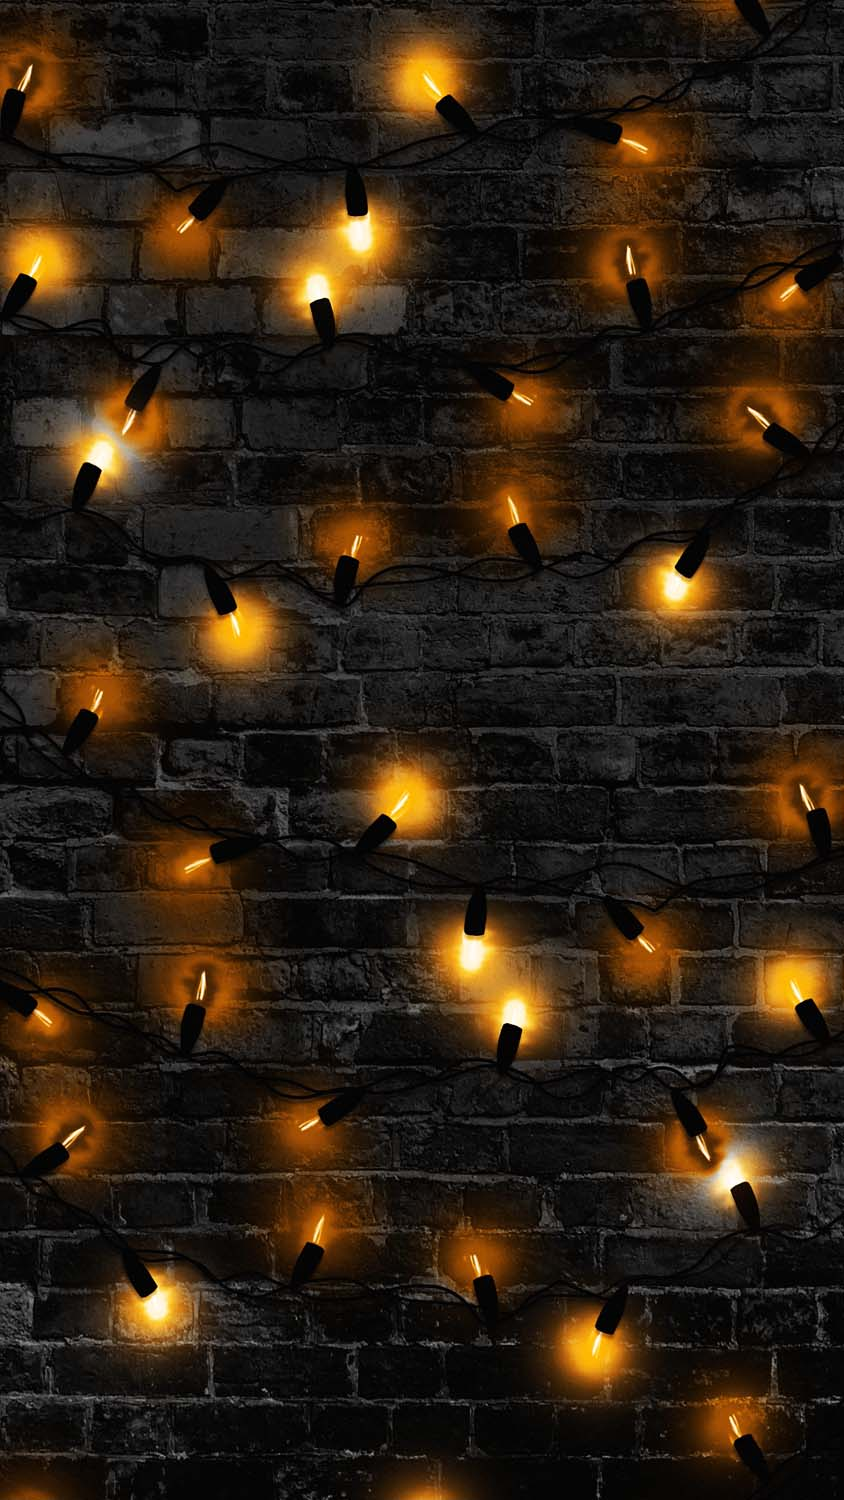 String Lights IPhone Wallpaper HD  IPhone Wallpapers